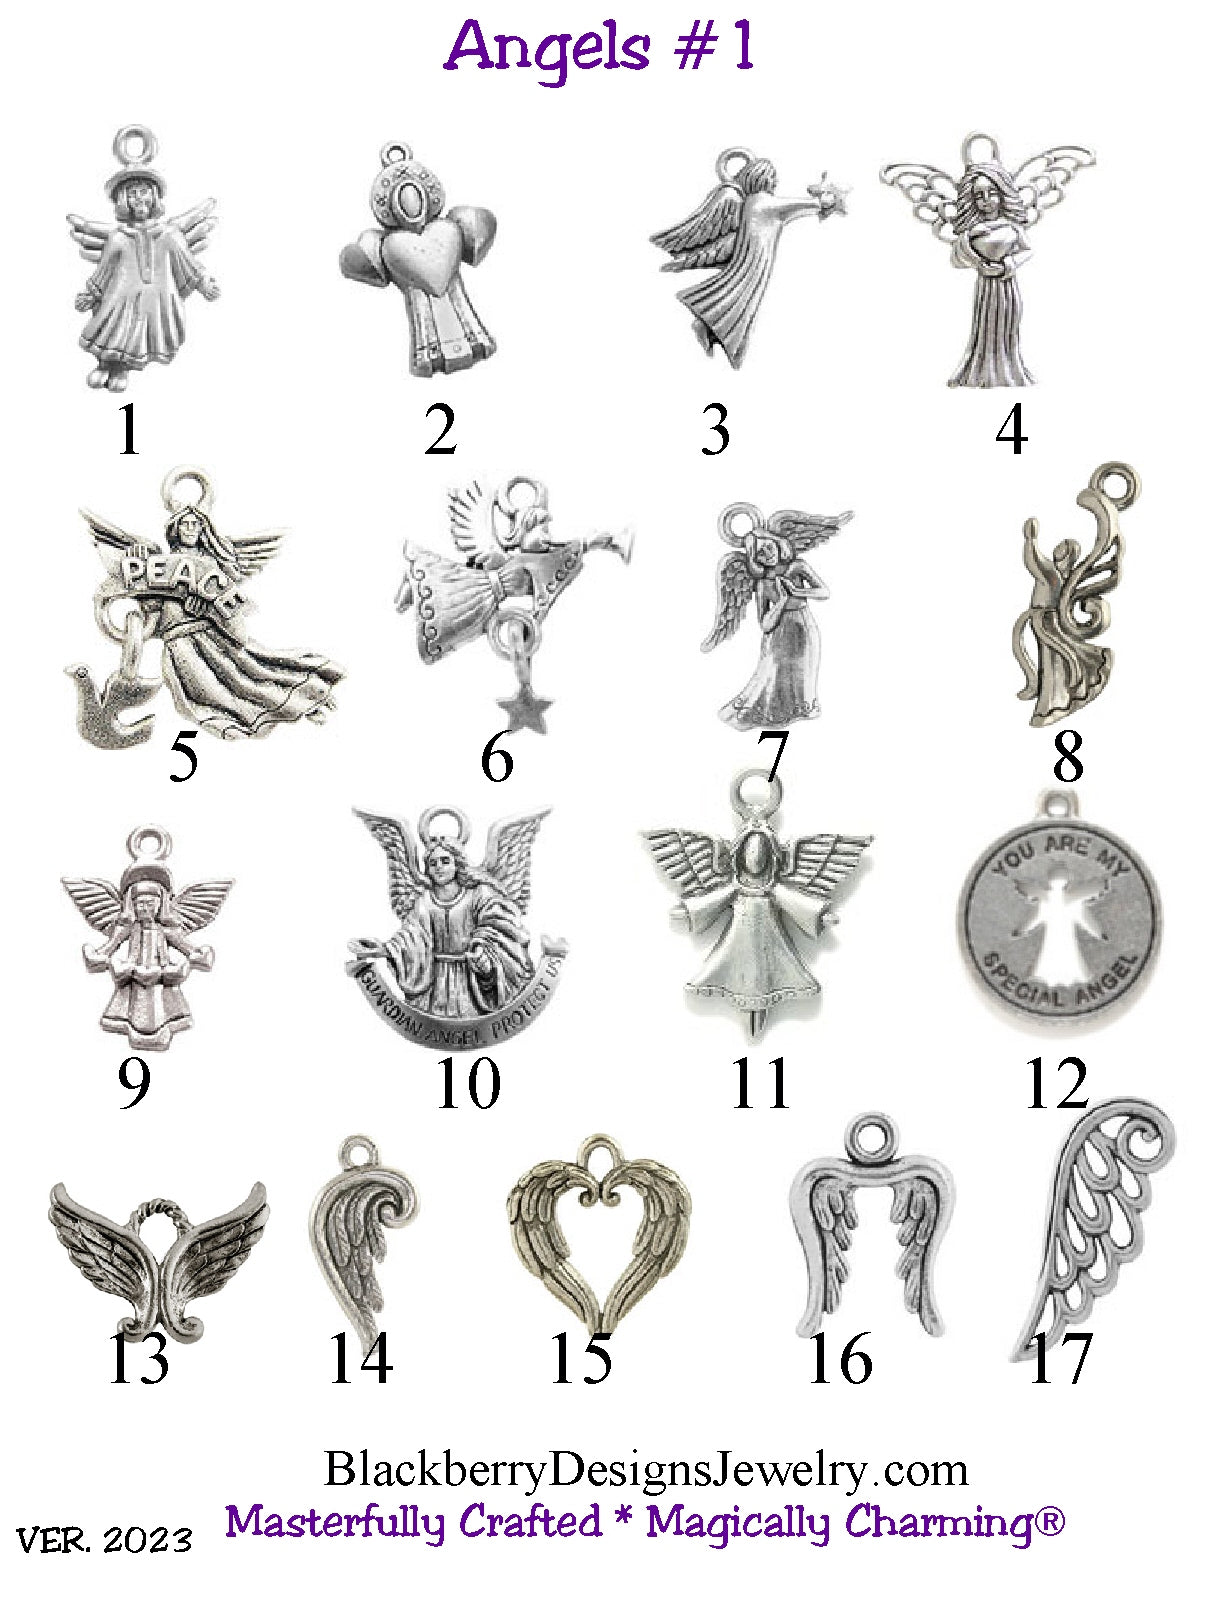 Add on Charms to your Jewelry